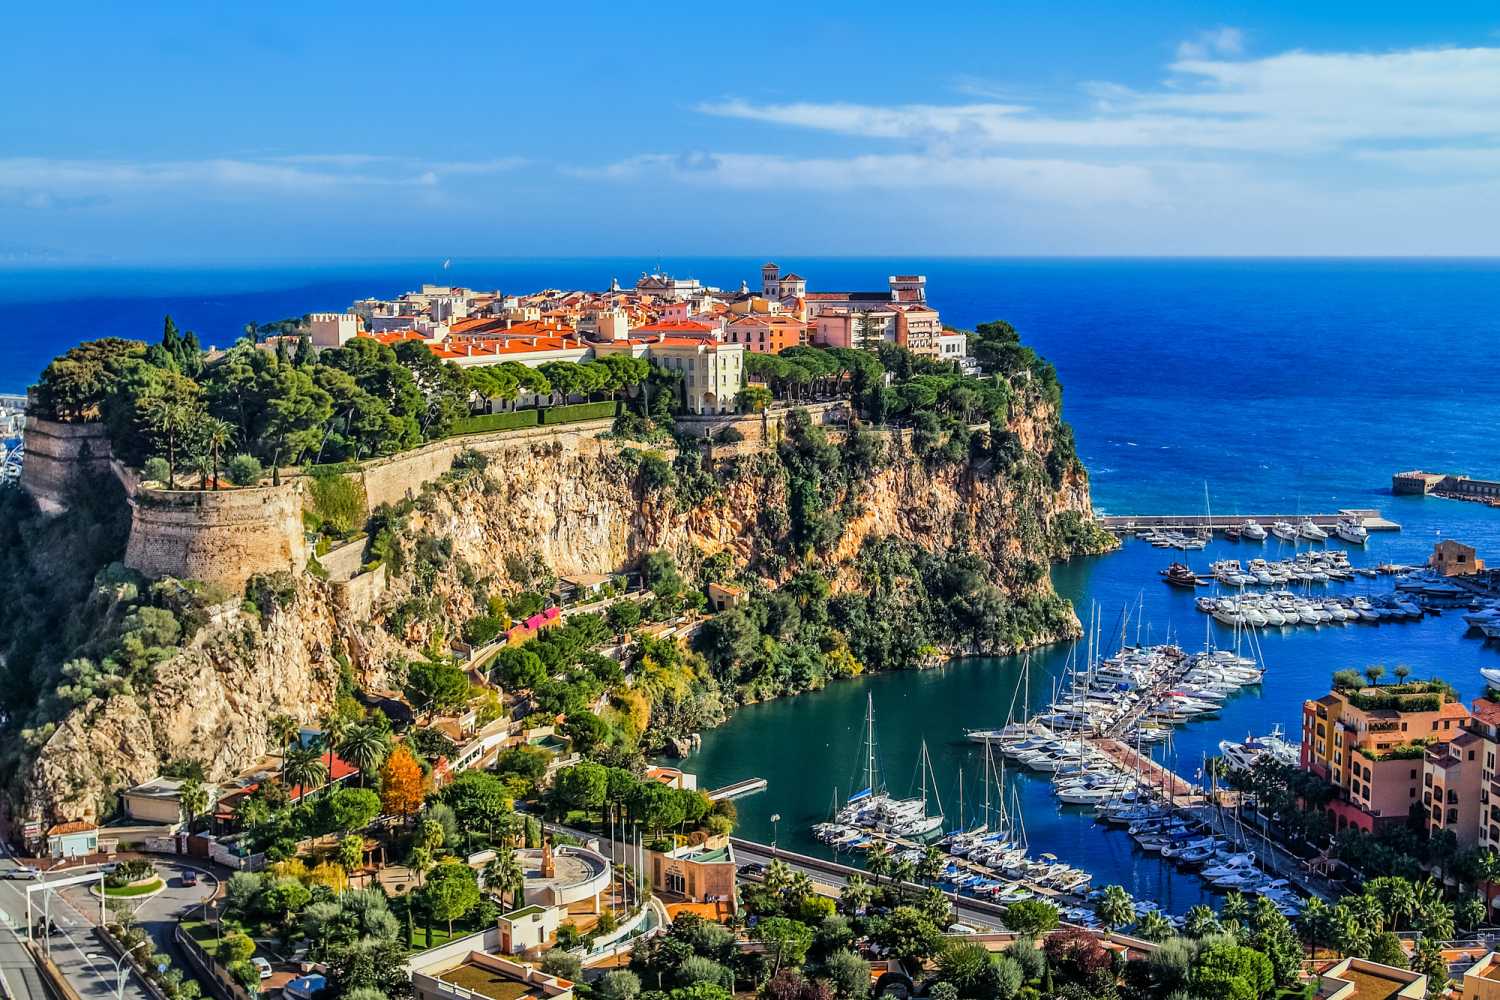 Monaco and Monte Carlo are great destinations to visit in Europe in July